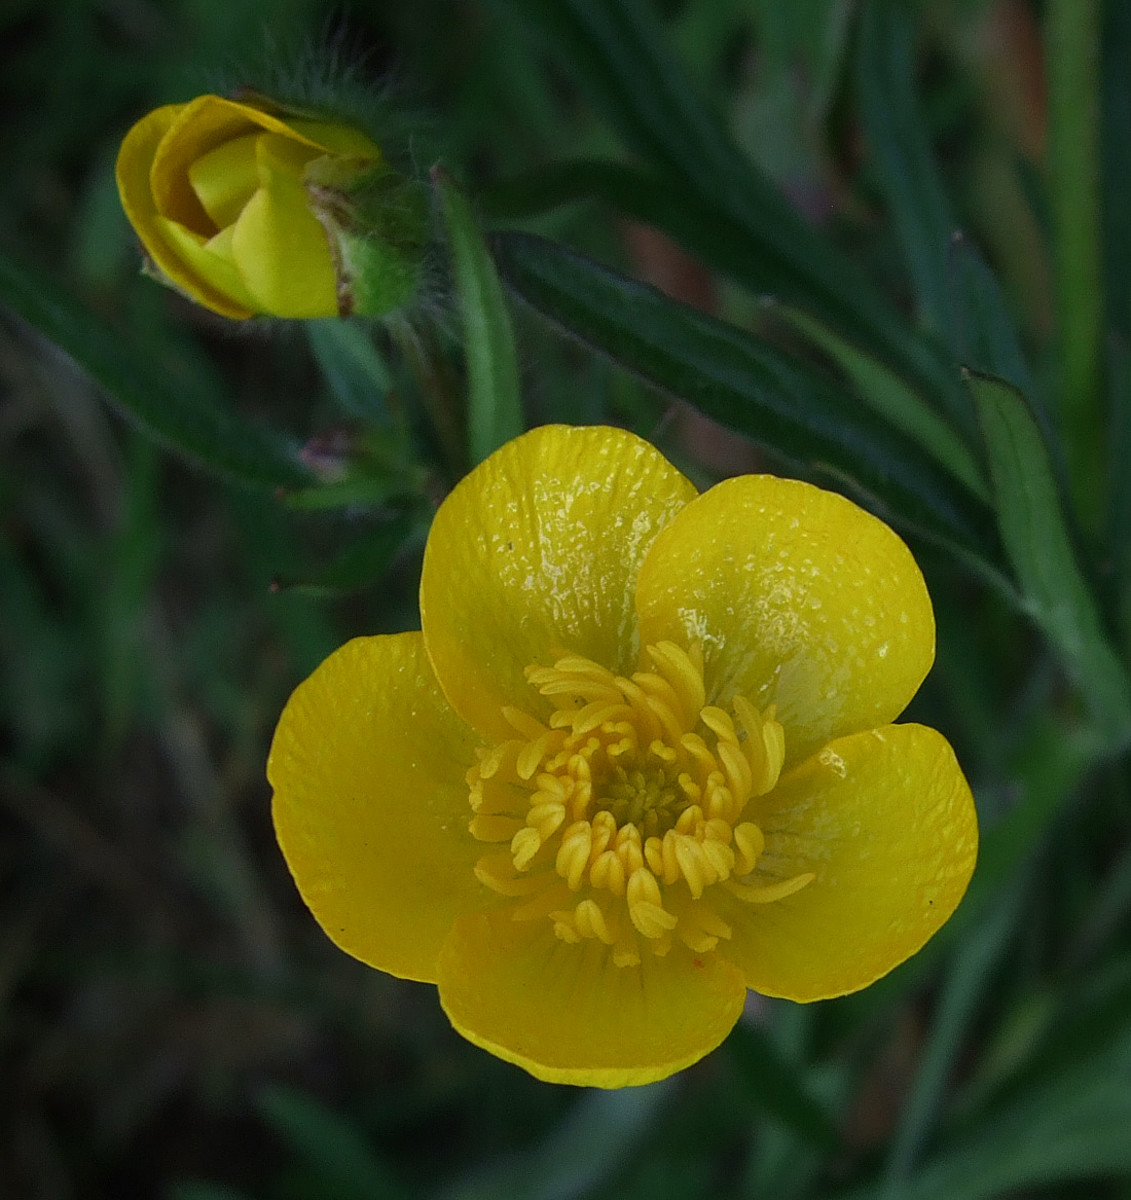 Buttercups are  common in grassy areas such as fields and pastures.